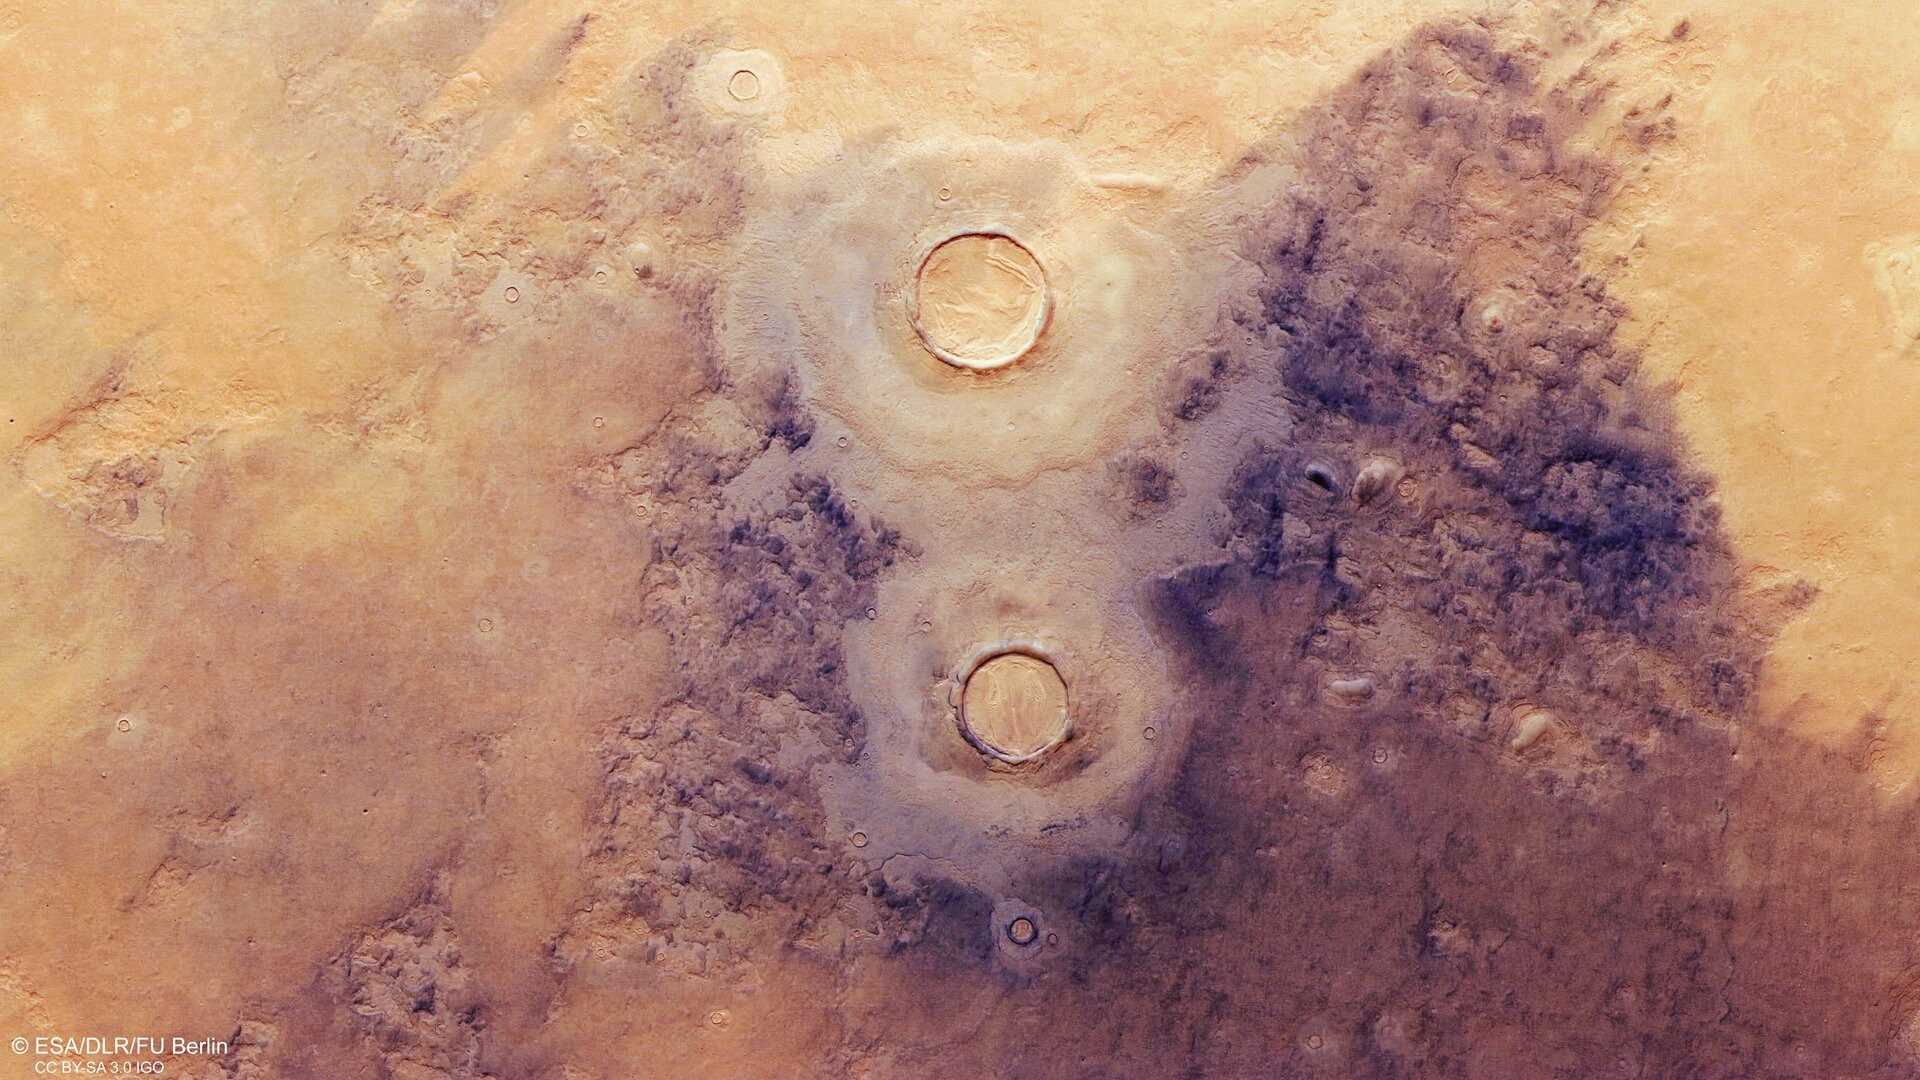 Information on Utopia Planitia on Mars is based on the European Space Agency's Mars Express data.